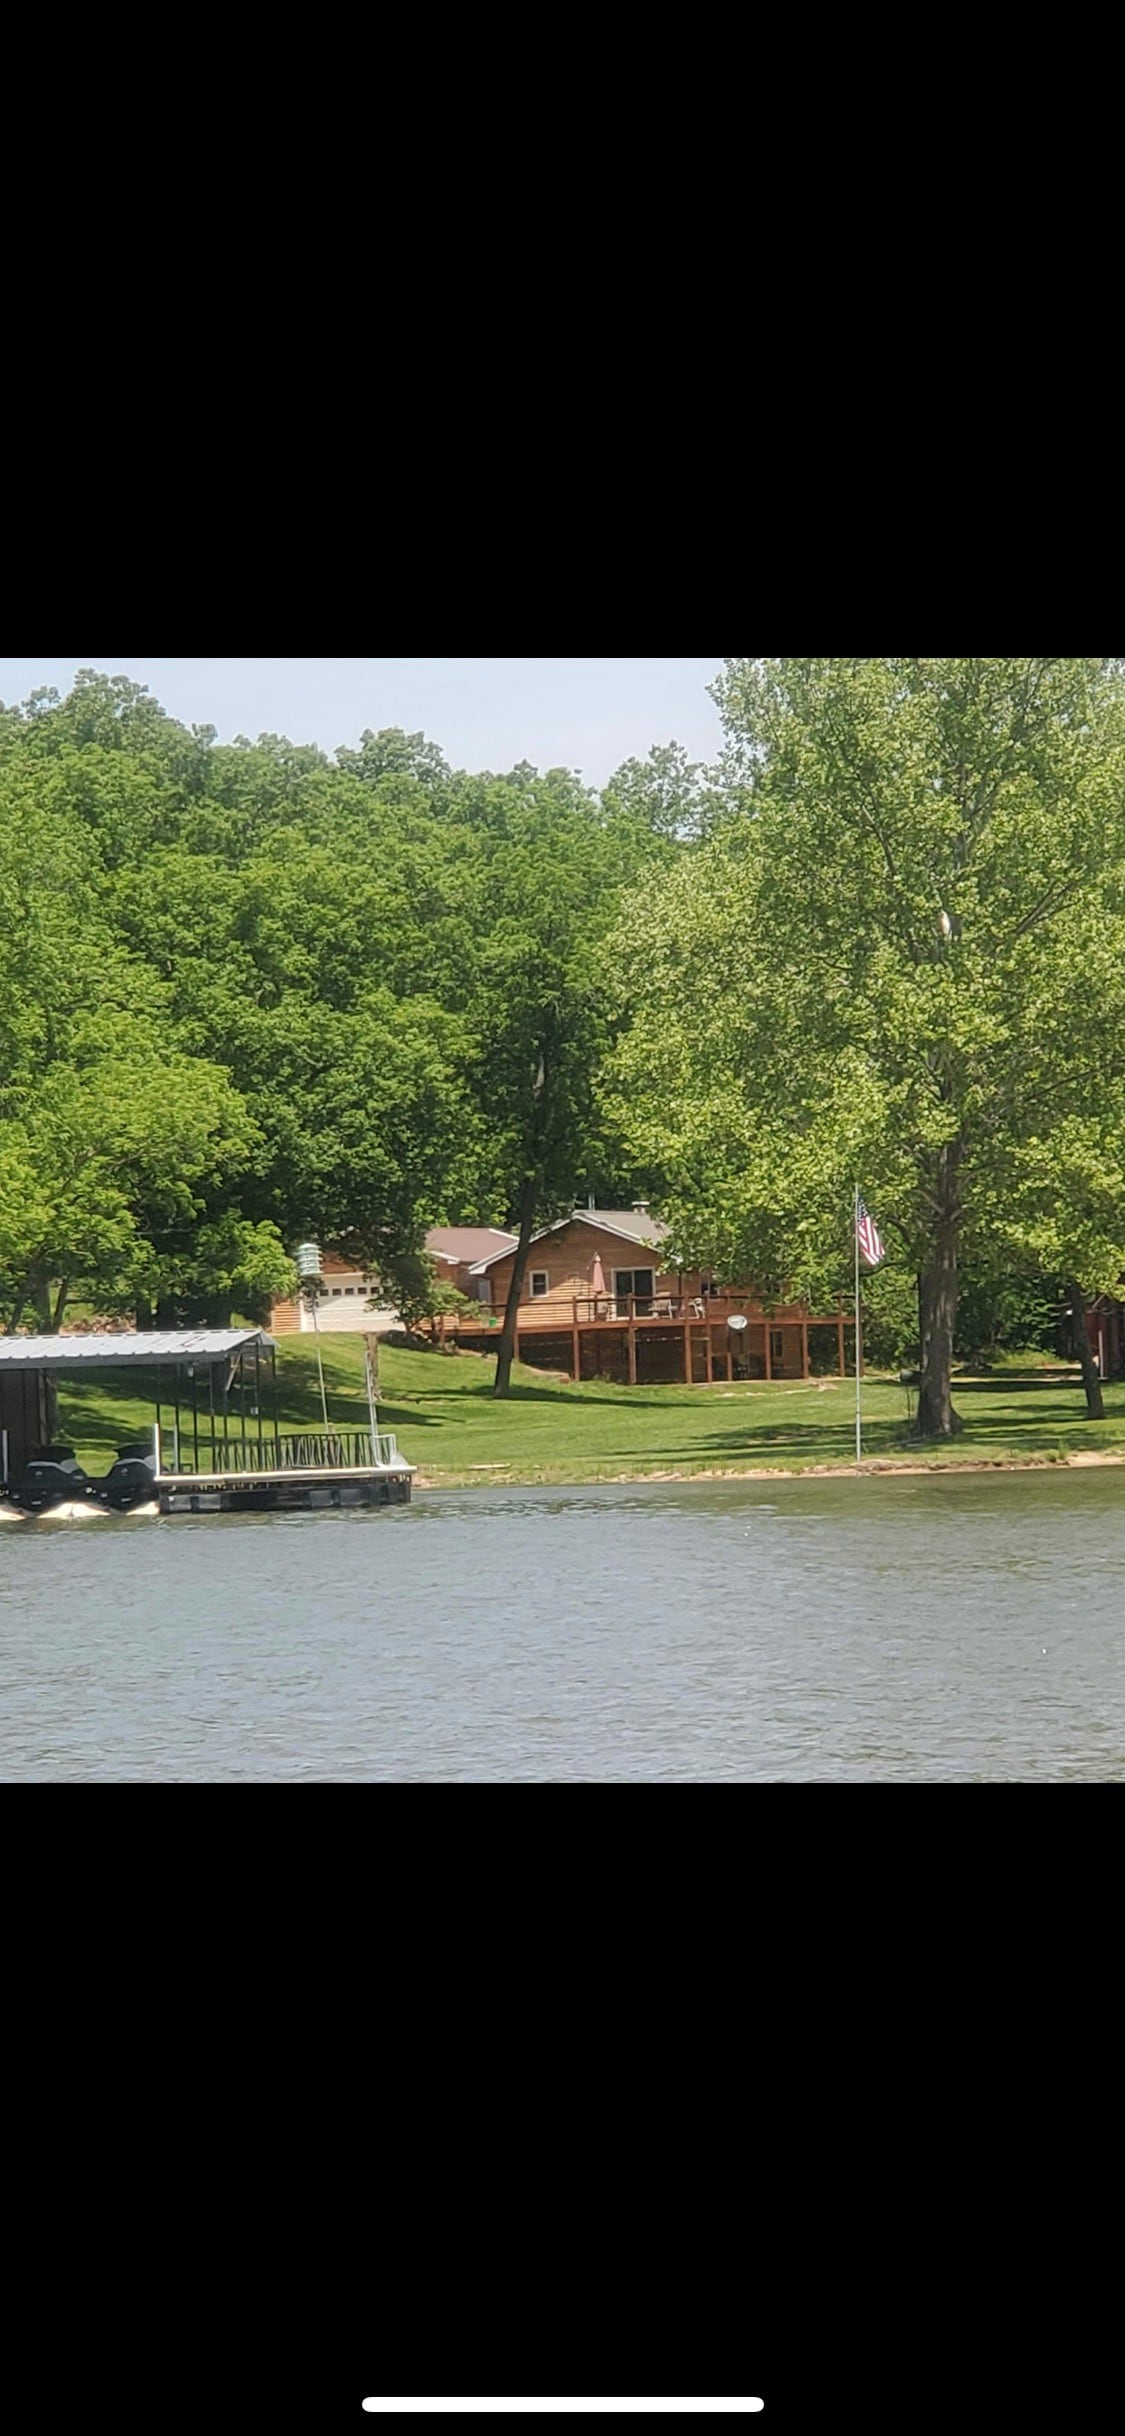 Doc’s Lakeside Cabins